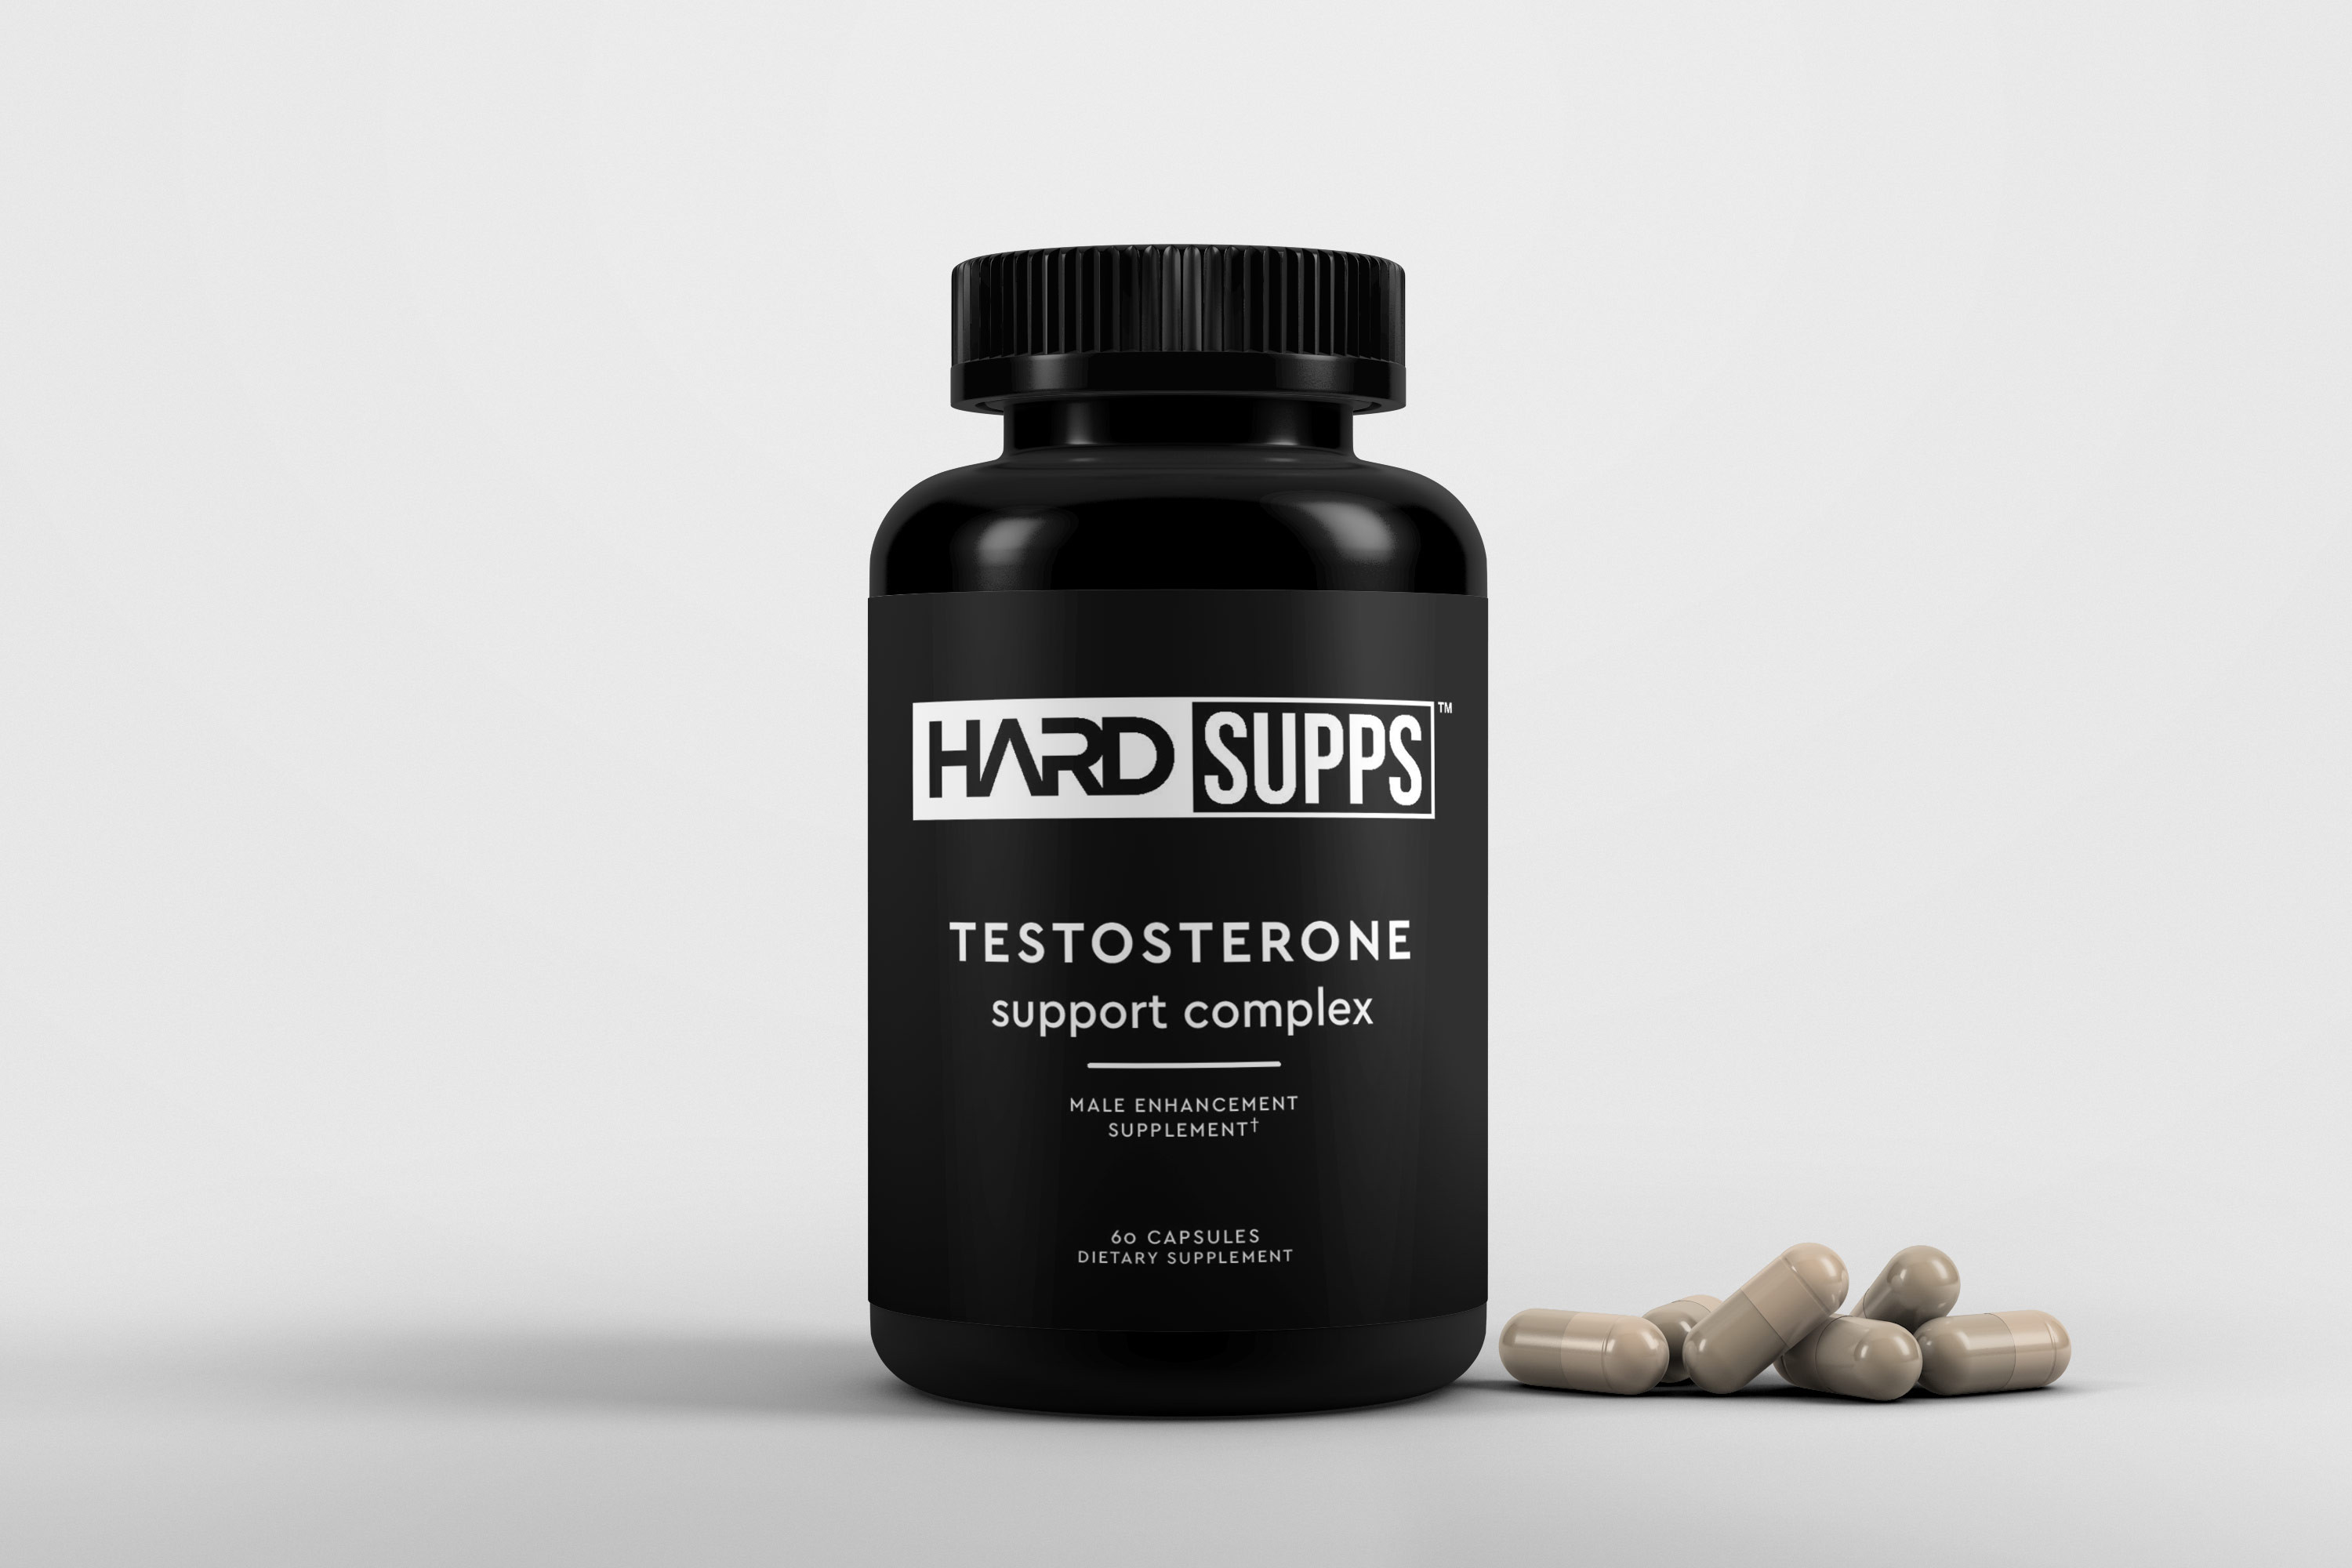 5 Ways to Boost Testosterone Naturally with Bodybuilding Supplements – Natural Bodybuilding 101 with Certified Bodybuilding & Sports Nutrition Coach / Fitness Model Maxwell Alexander – Presented by Testosterone Support Complex from HARD SUPPS